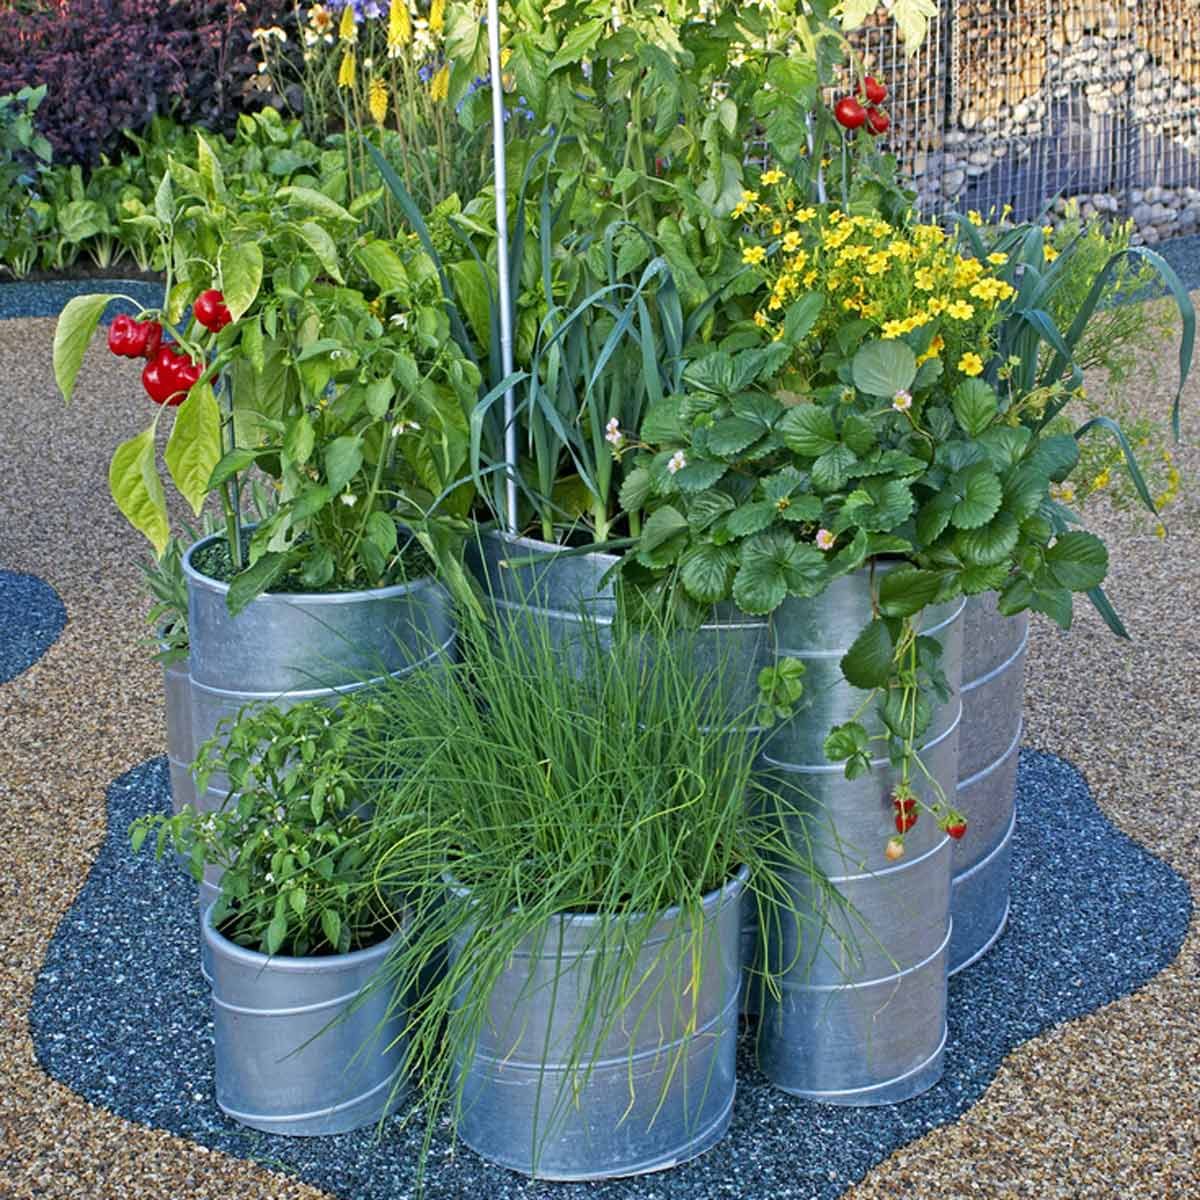 A Dozen Vegetables You Can Grow in Pots | Taste of Home